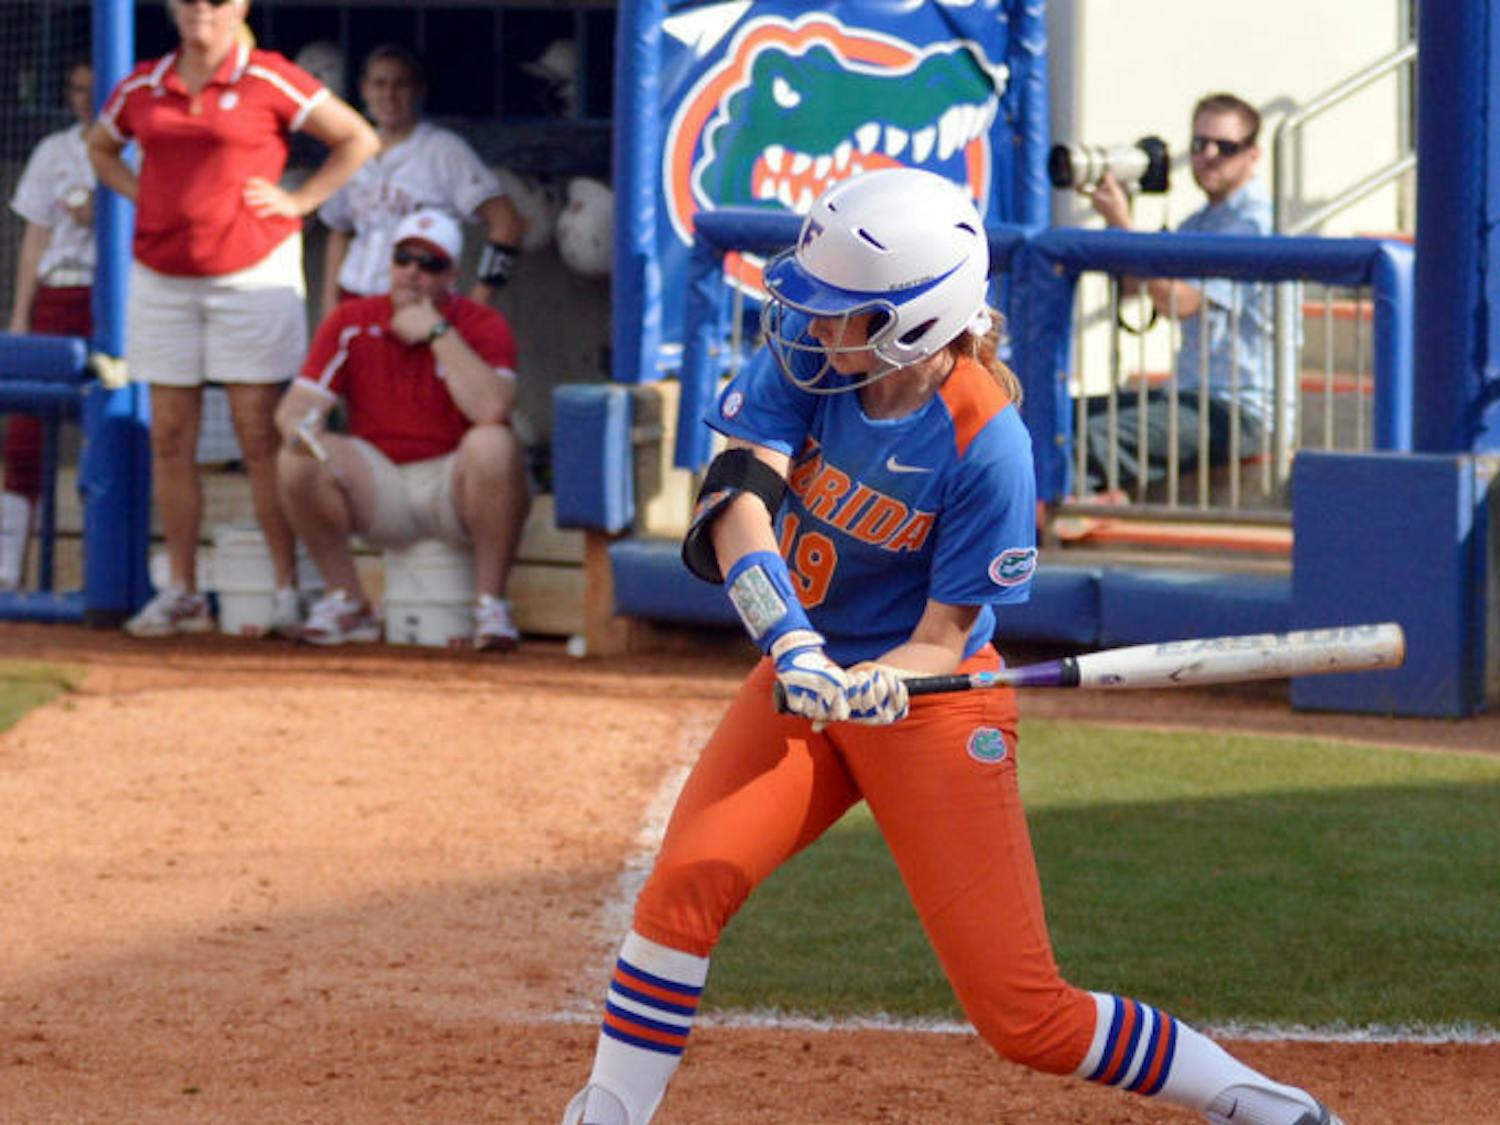 Chelsea Herndon swings during Florida’s 8-0 win against Indiana on Feb. 22 at Katie Seashole Pressly Stadium.